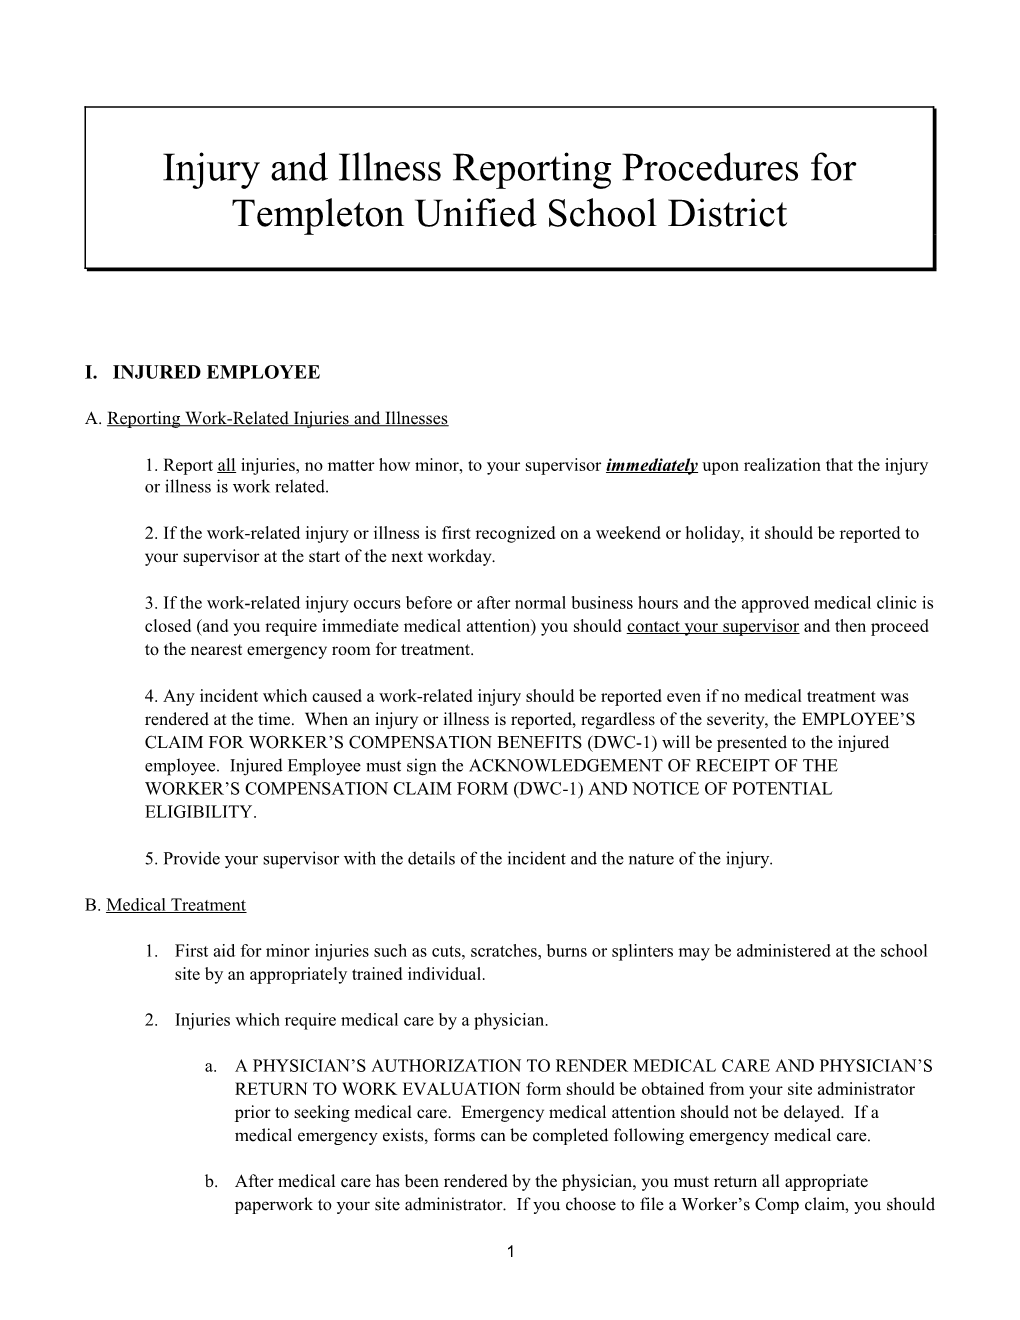 Injury and Illness Reporting Procedures for Templeton Unified School District